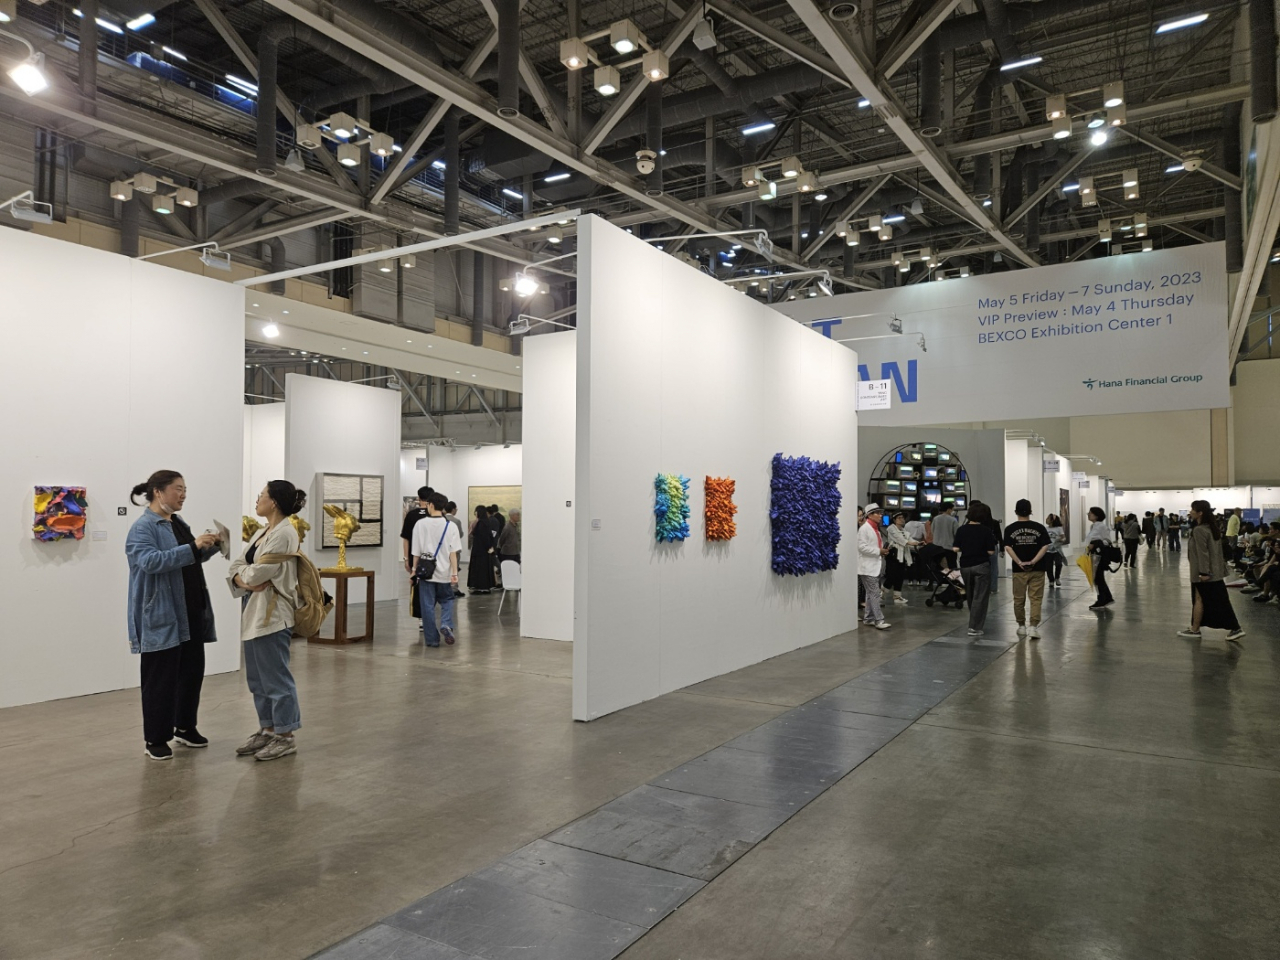 People visit Art Busan 2023 on Friday, the first public day of the art fair, at Bexco in Busan. (Park Yuna/The Korea Herald)